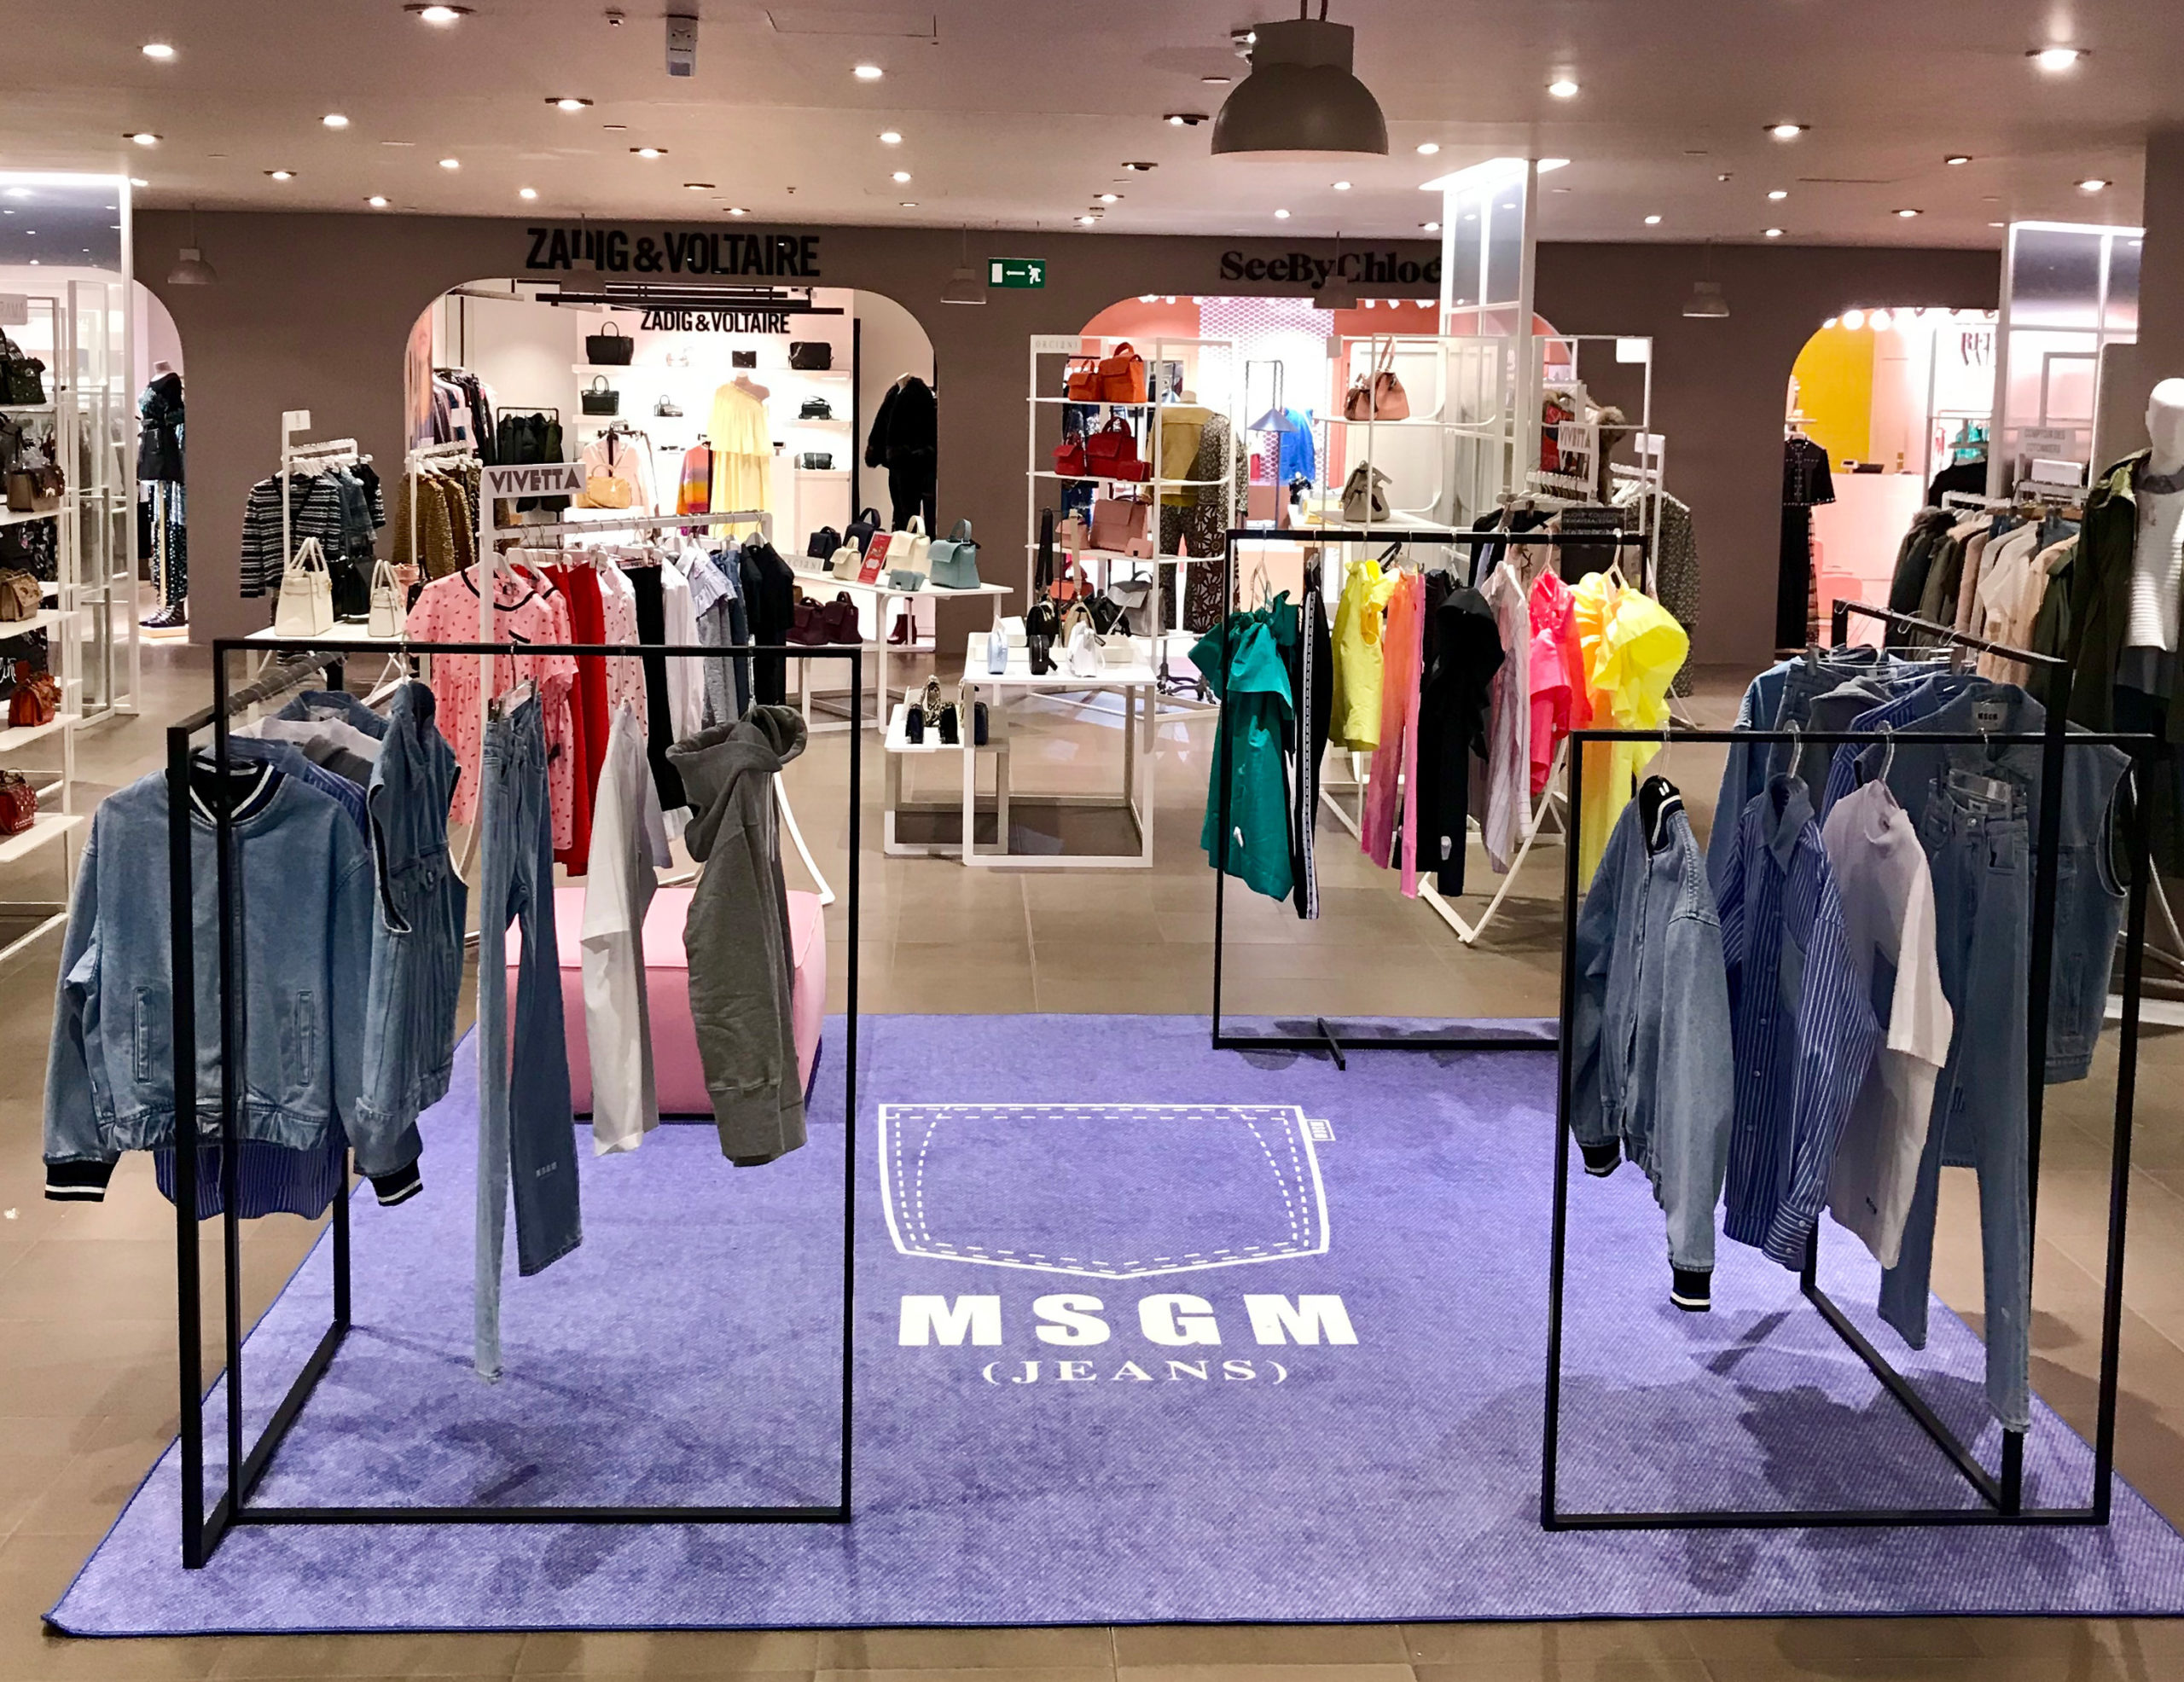 MSGM Jeans, pop up Rinascente Milano with rug and black frames